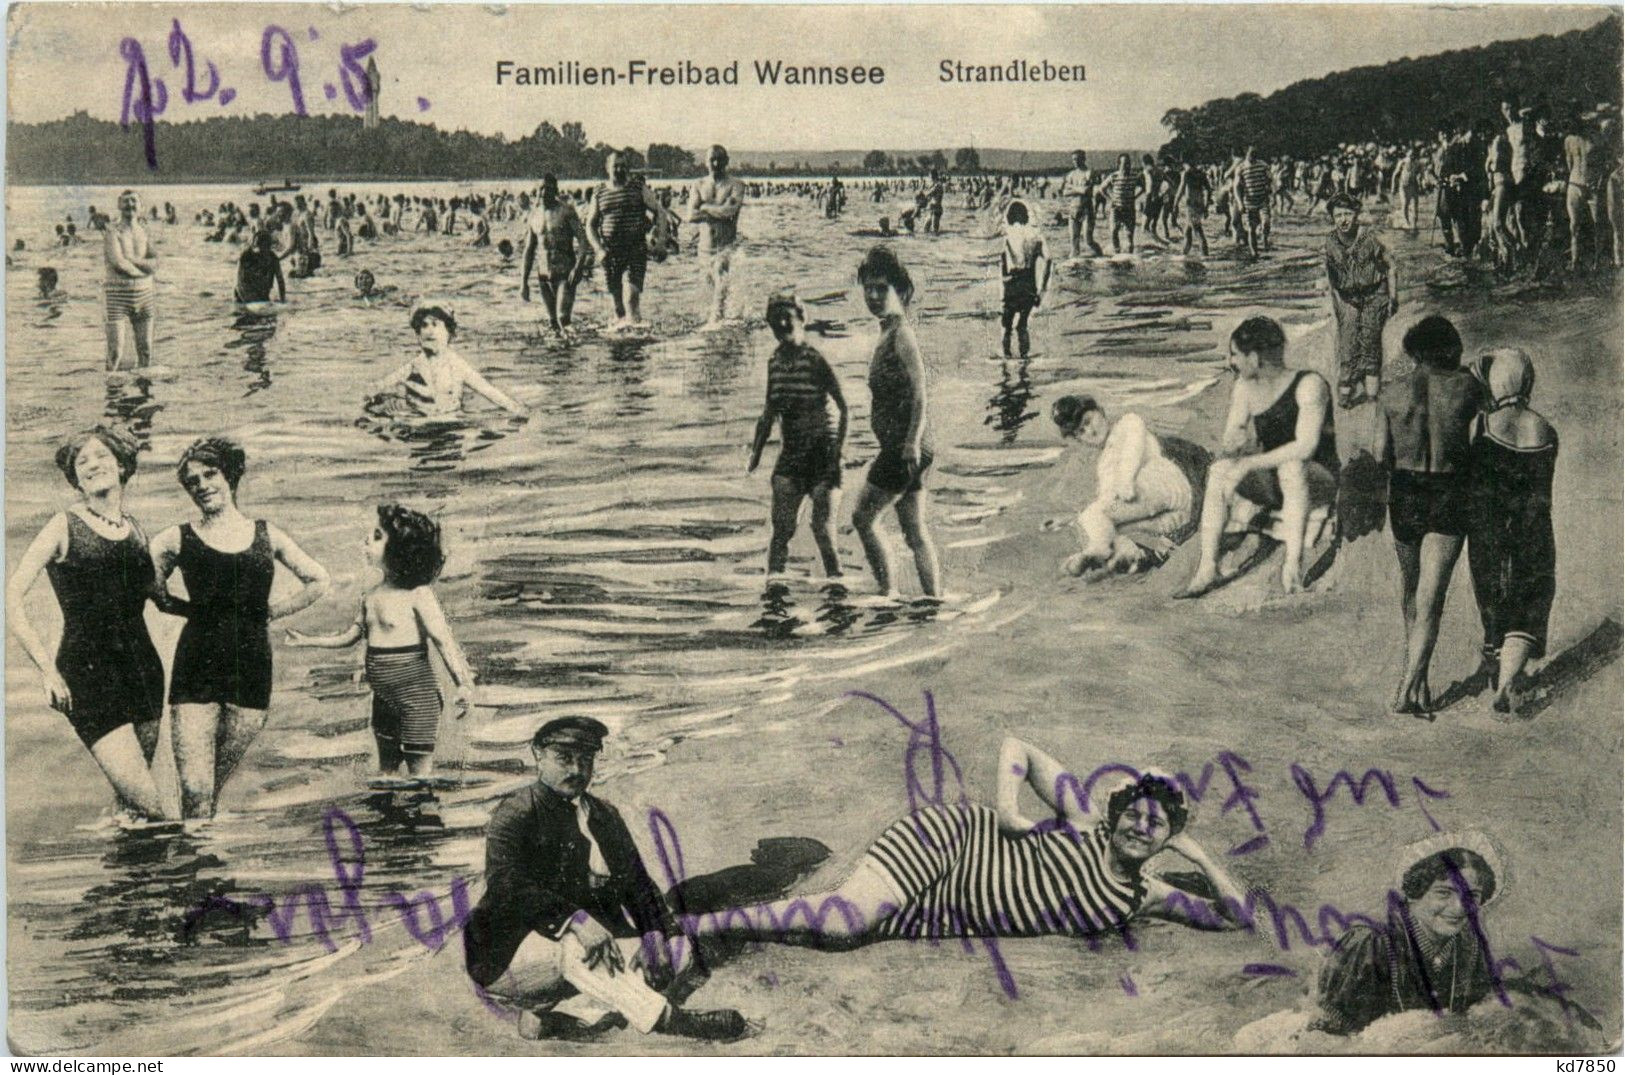 Wannsee - Familienbad - Wannsee